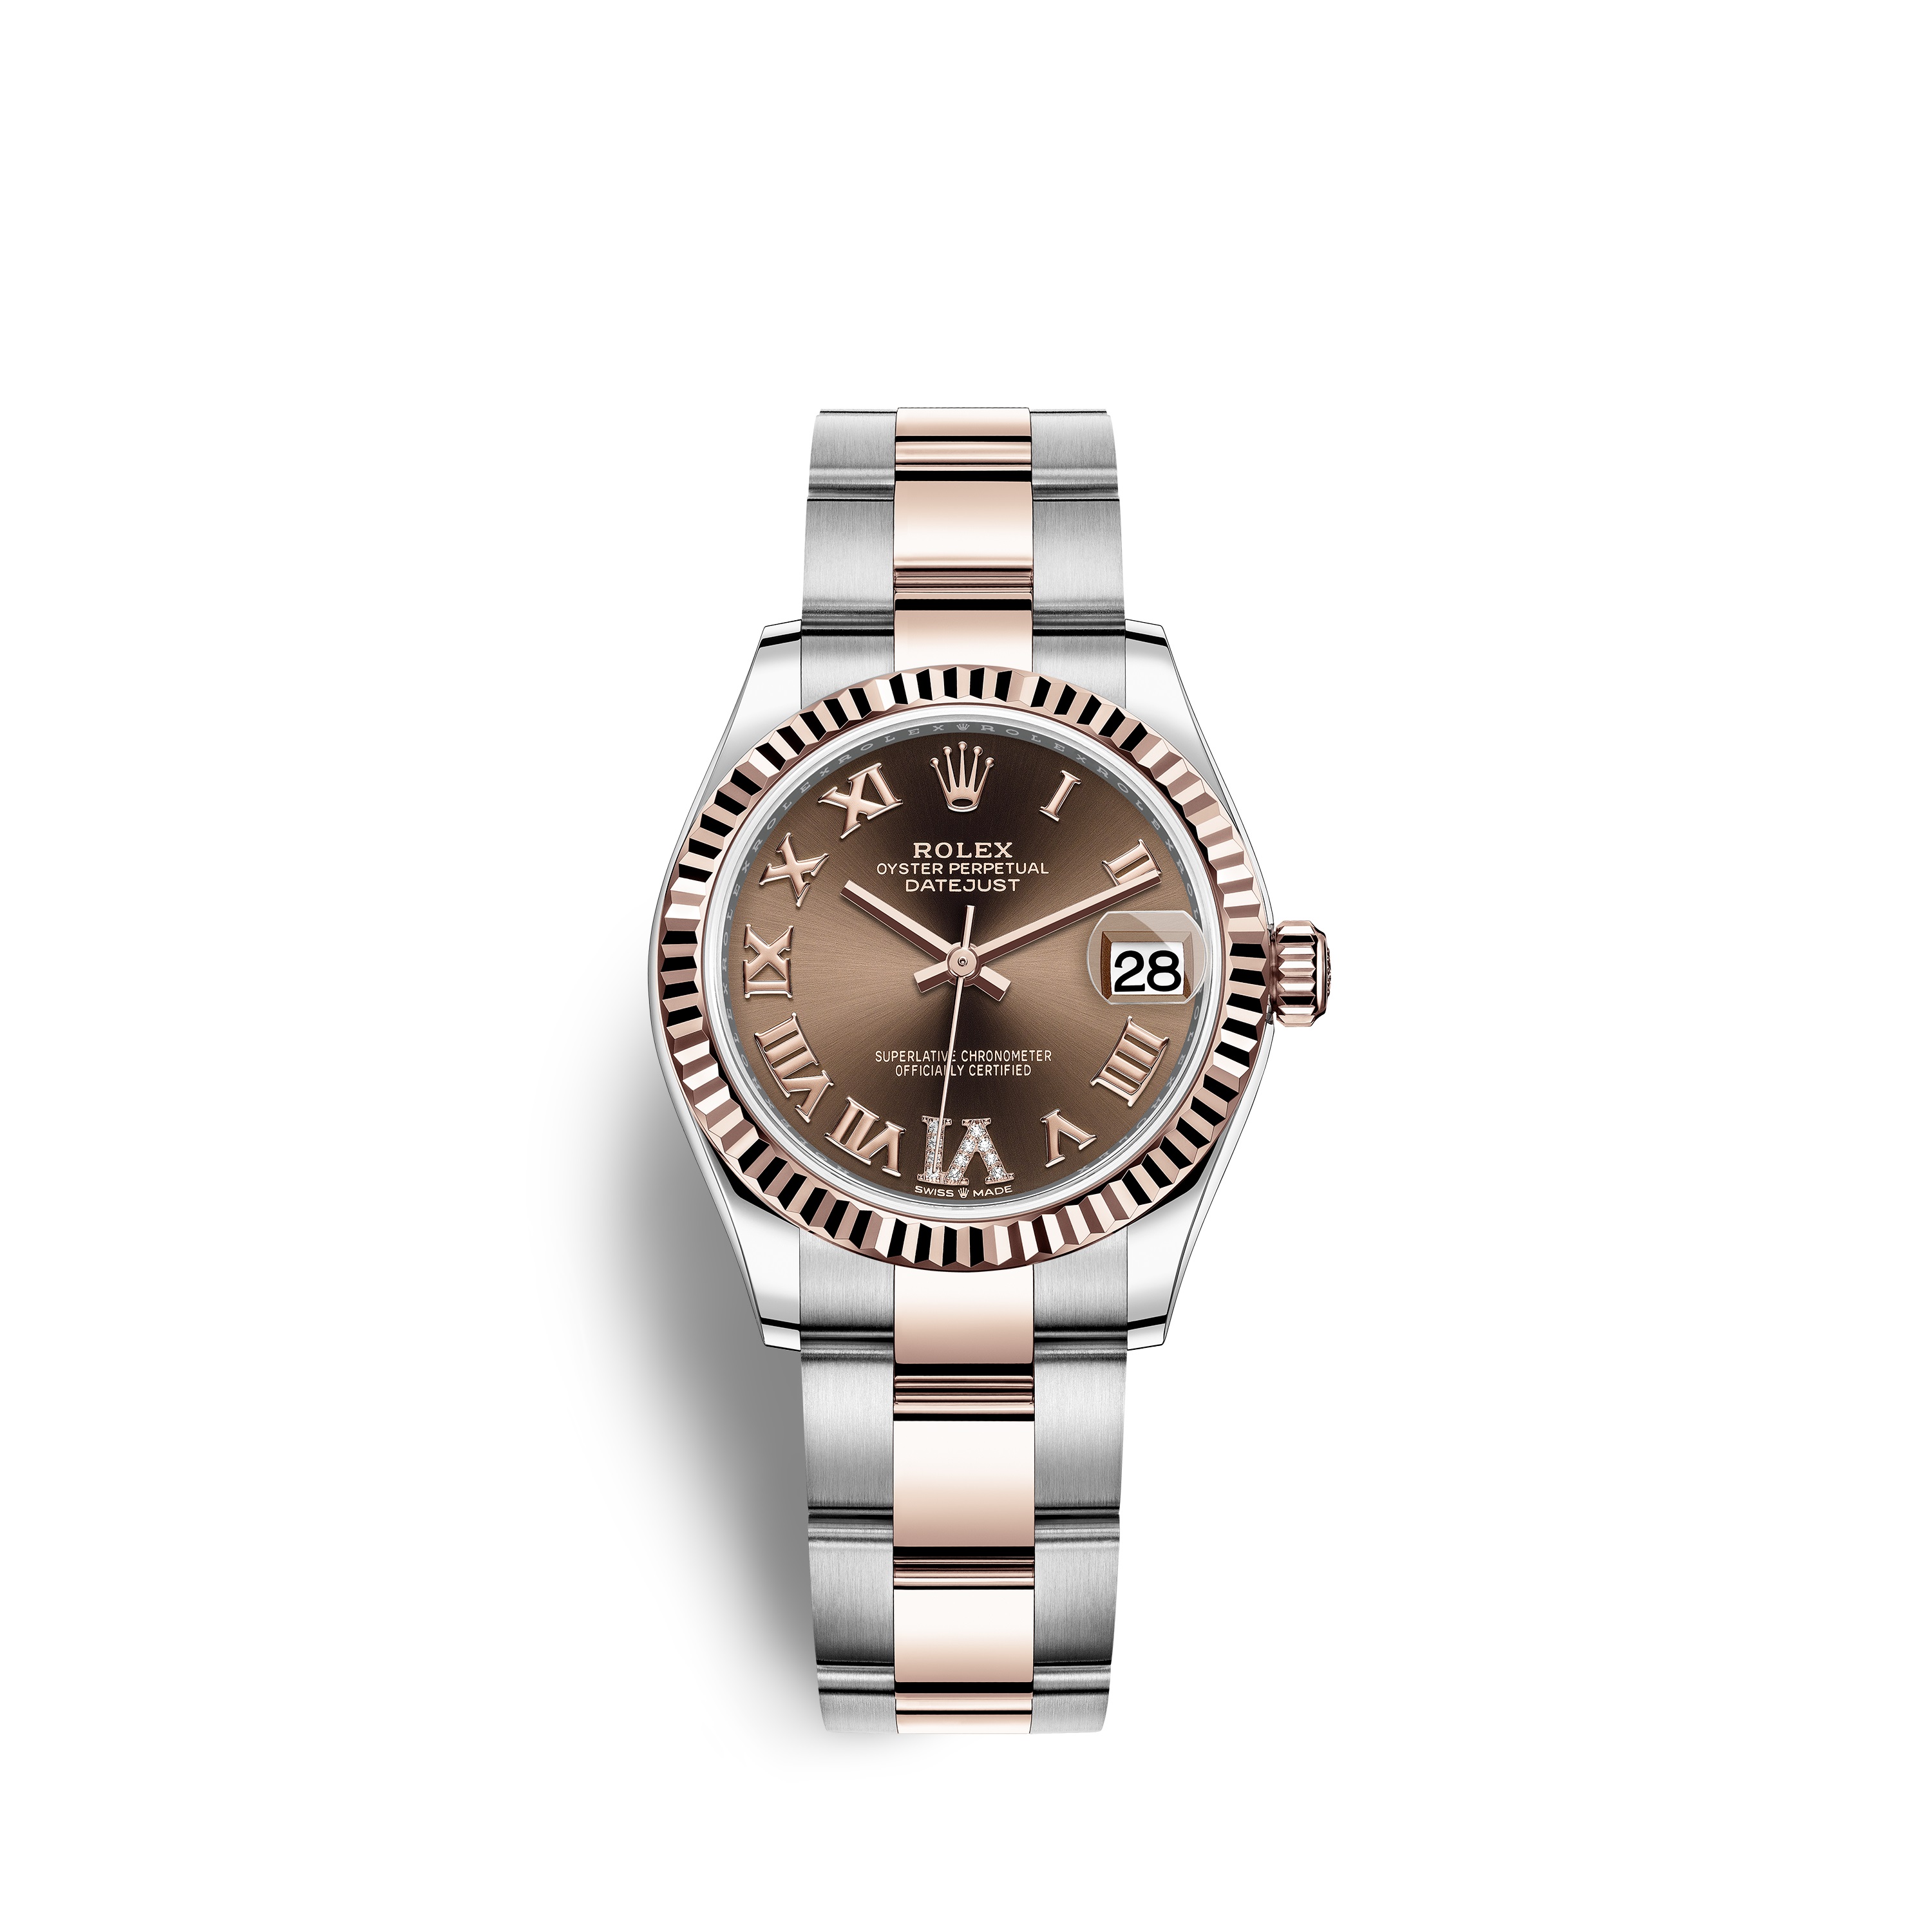 Datejust 31 278271 Rose Gold & Stainless Steel Watch (Chocolate Set with Diamonds)